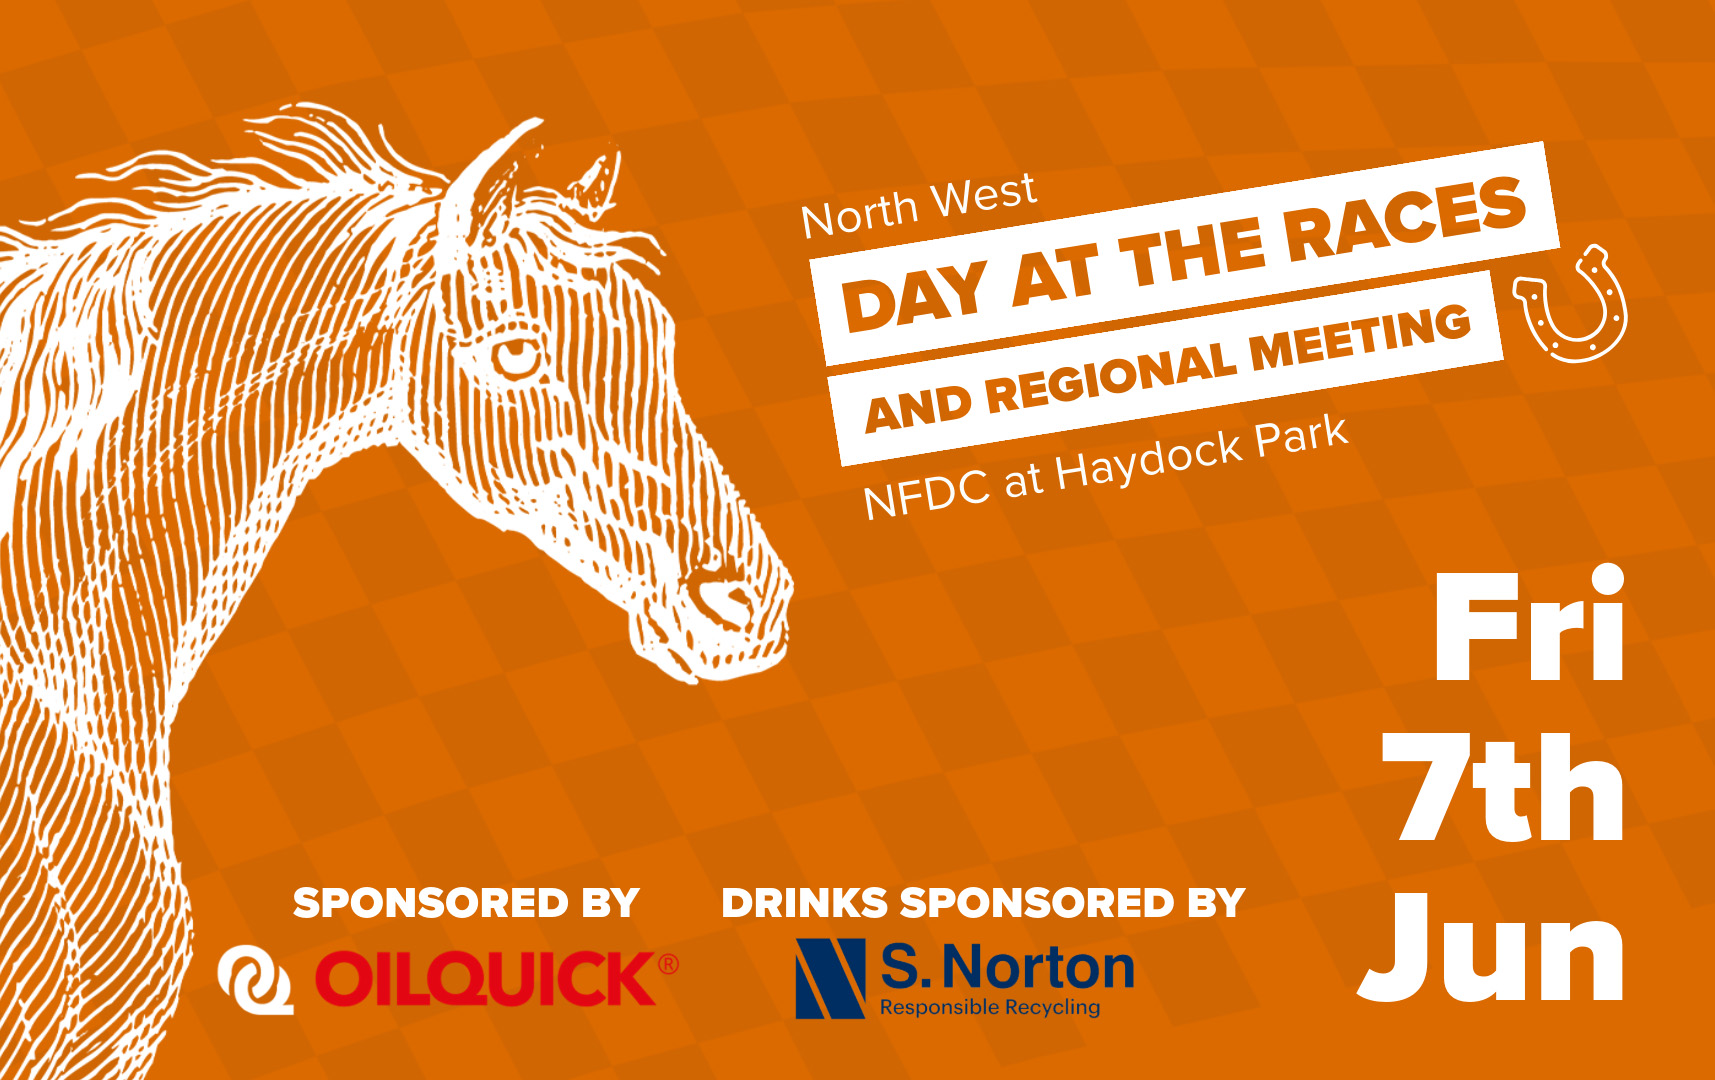 North West Day at the Races and Regional Meeting